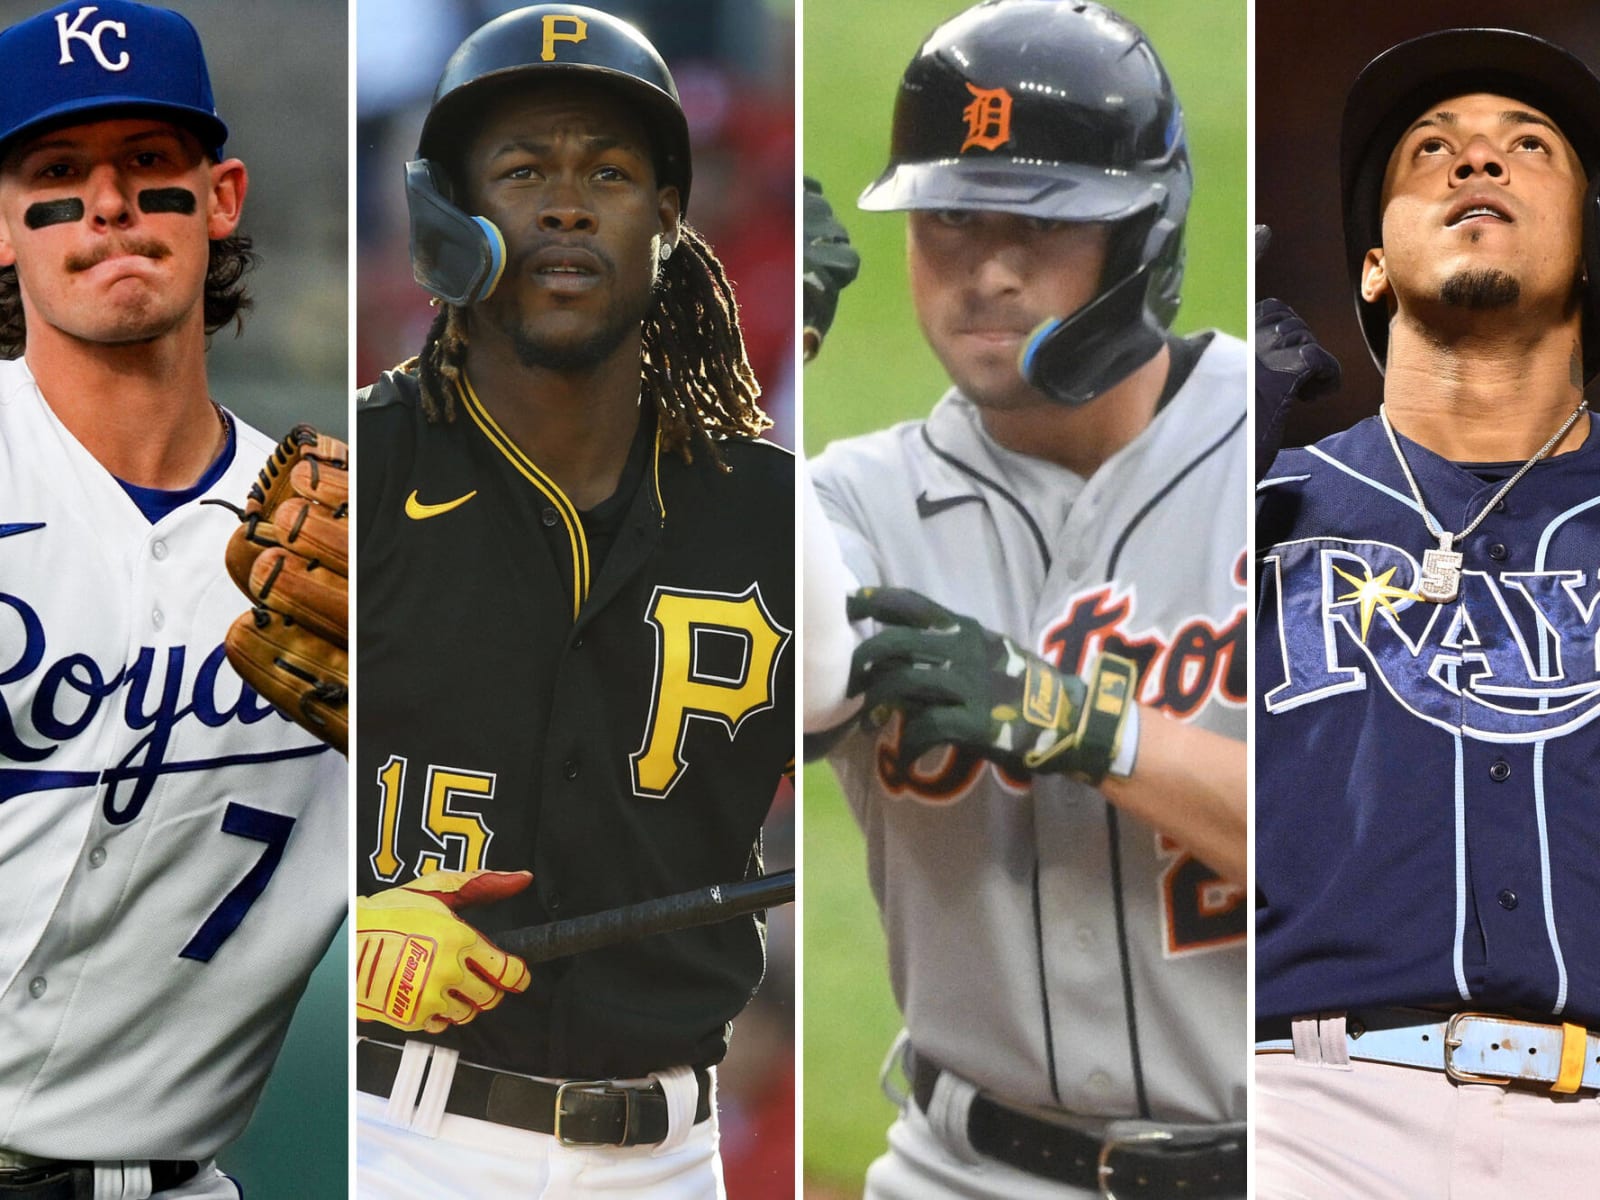 Salivating Over Major League Baseball's Sexiest Players - ZeitGAYst